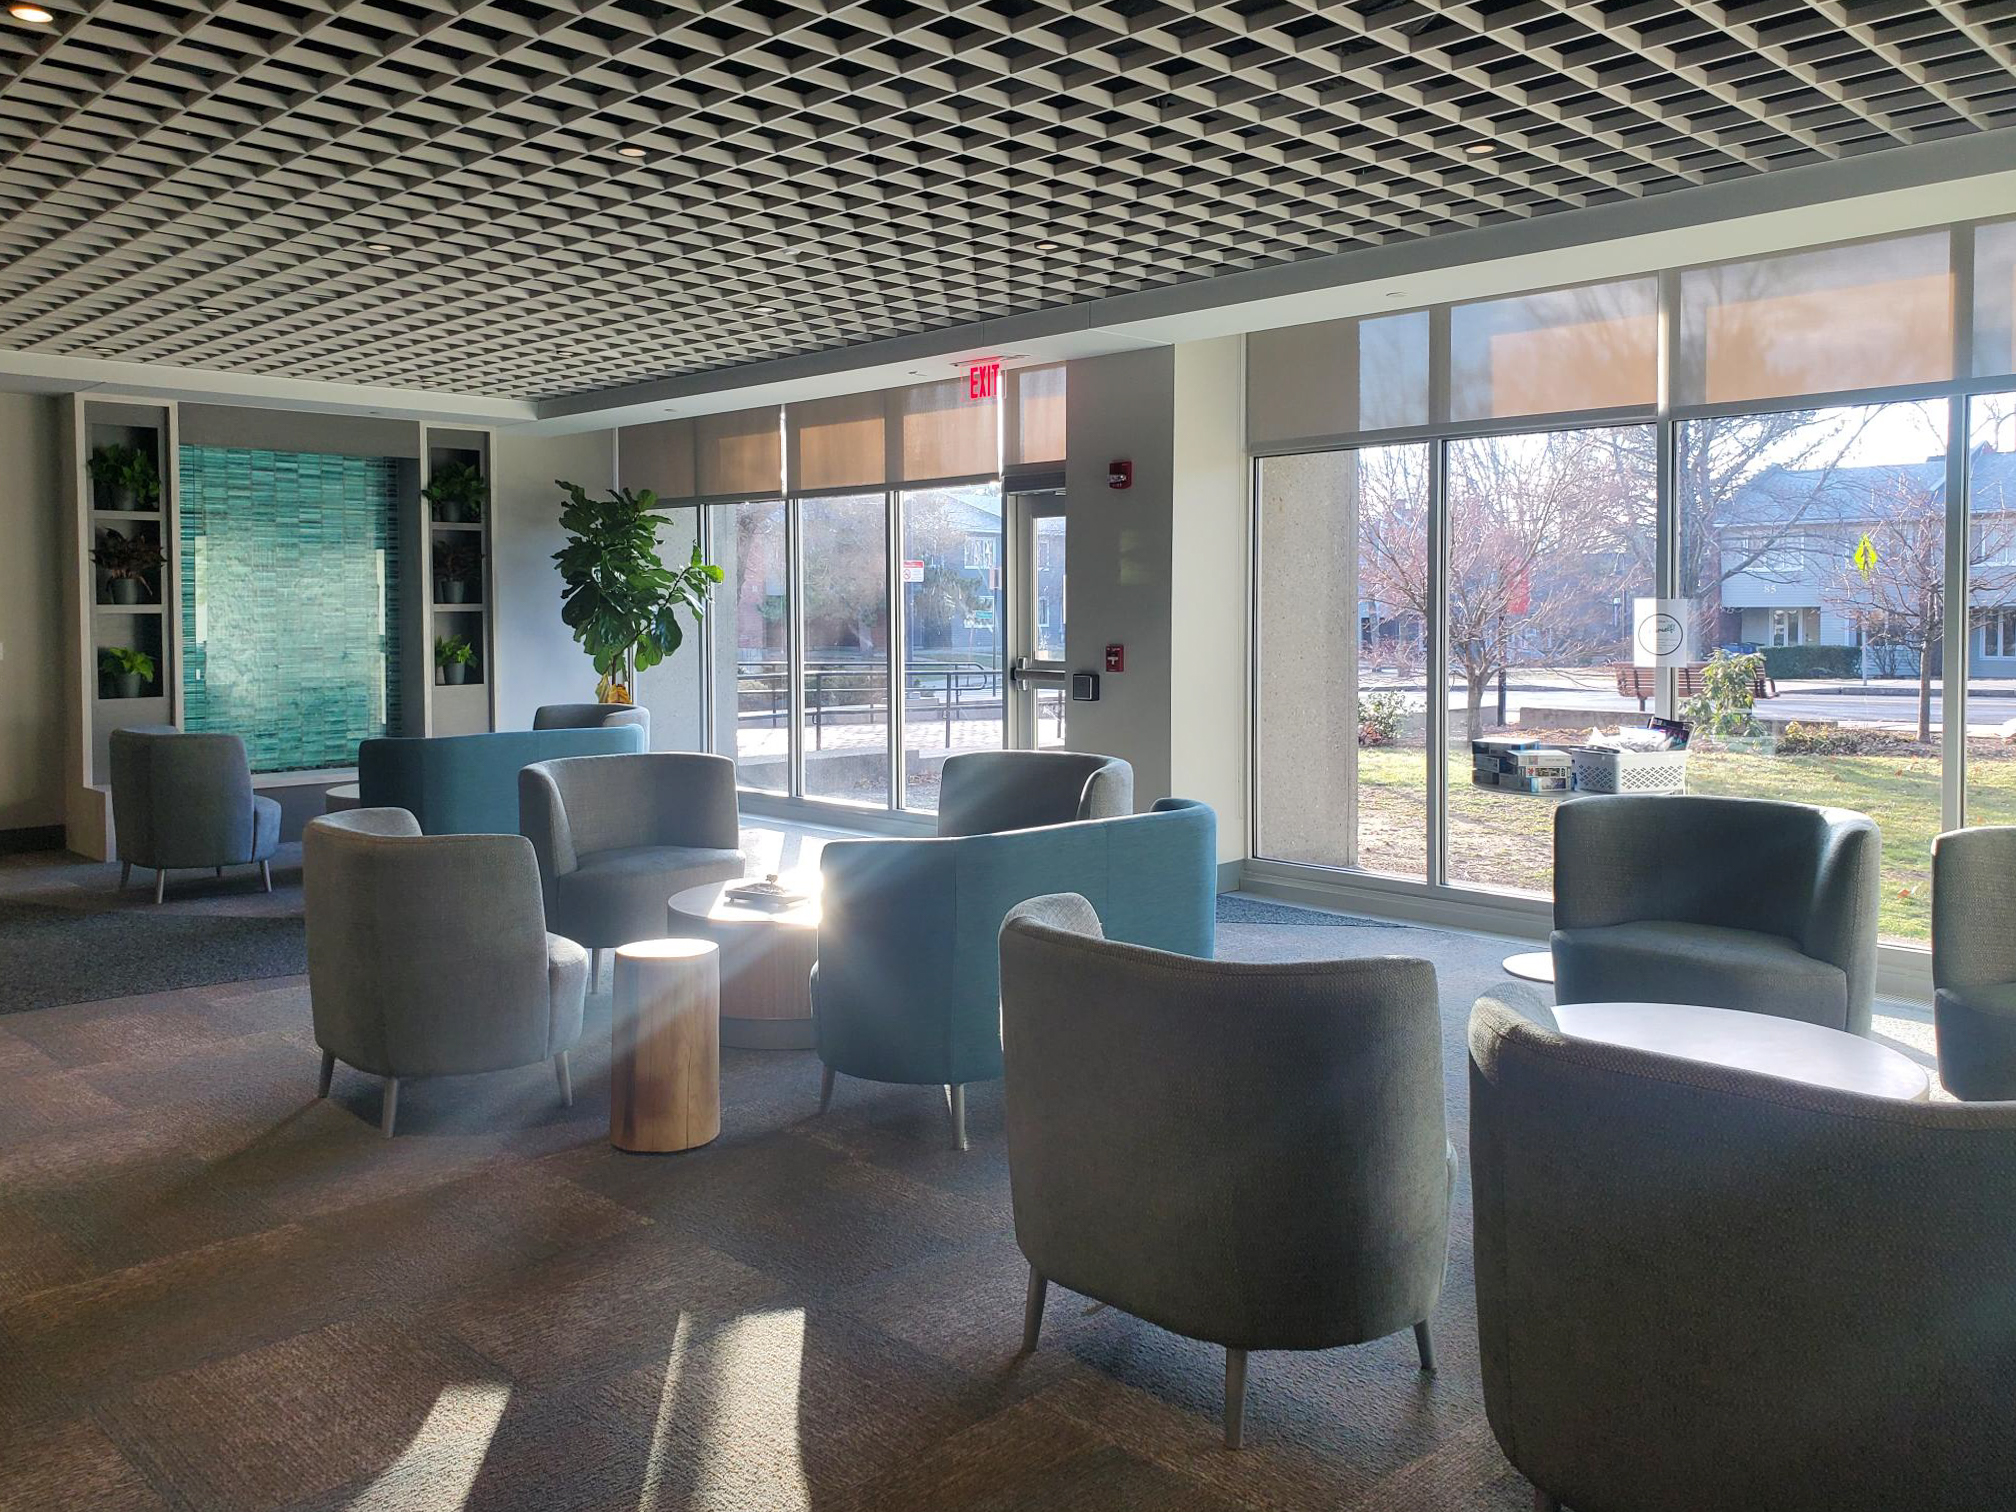 Clover Lounge Seating for Lobby Areas - Stance Healthcare